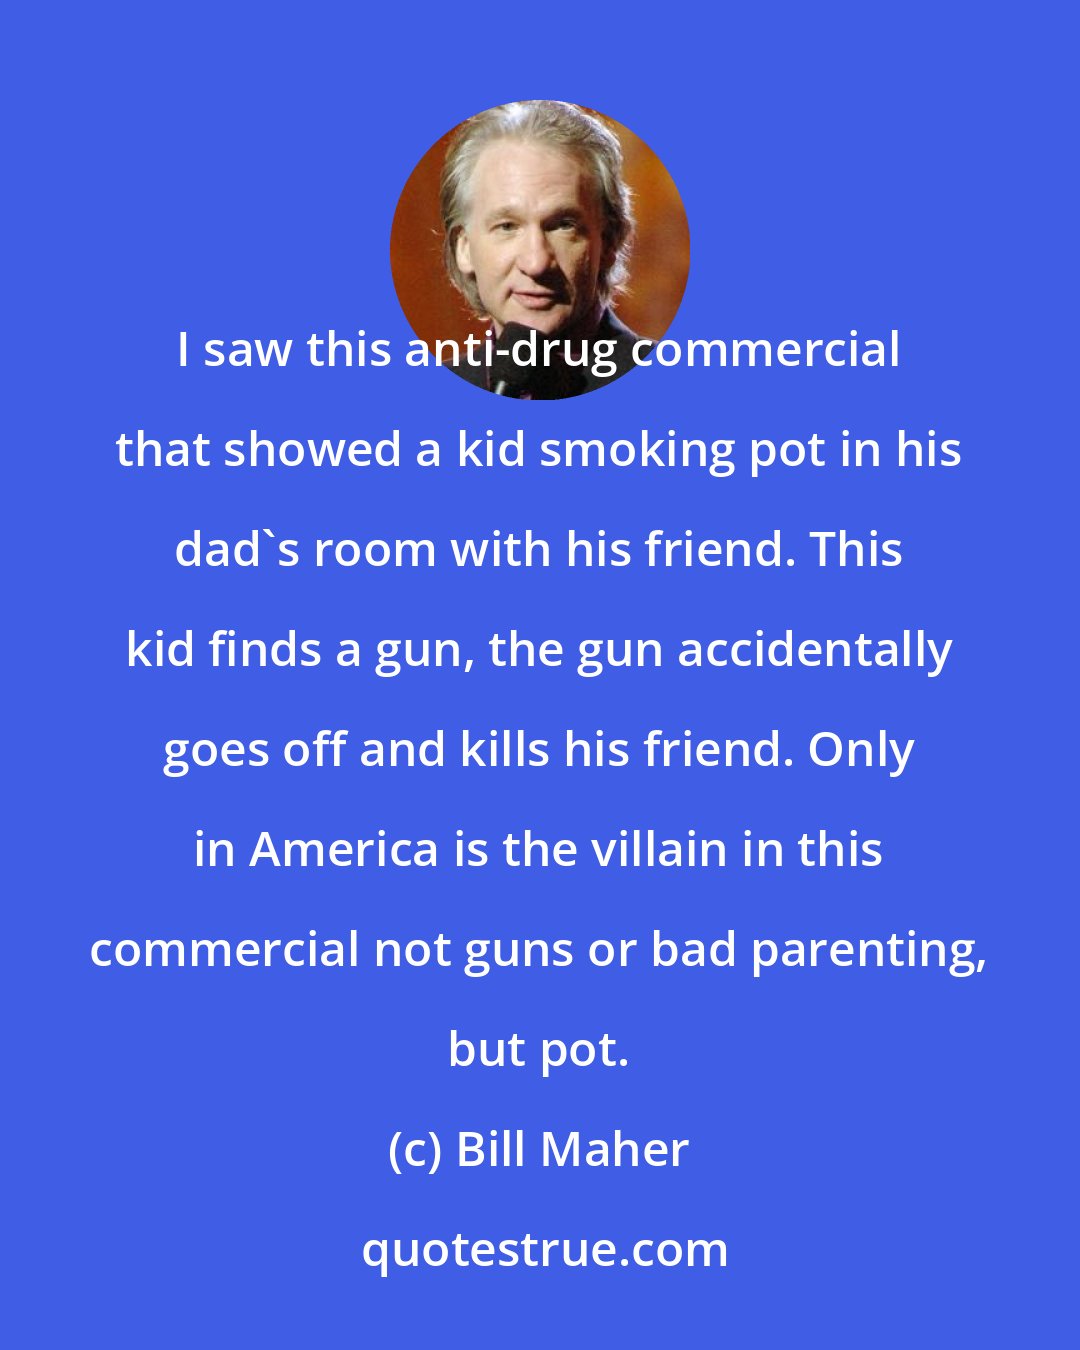 Bill Maher: I saw this anti-drug commercial that showed a kid smoking pot in his dad`s room with his friend. This kid finds a gun, the gun accidentally goes off and kills his friend. Only in America is the villain in this commercial not guns or bad parenting, but pot.